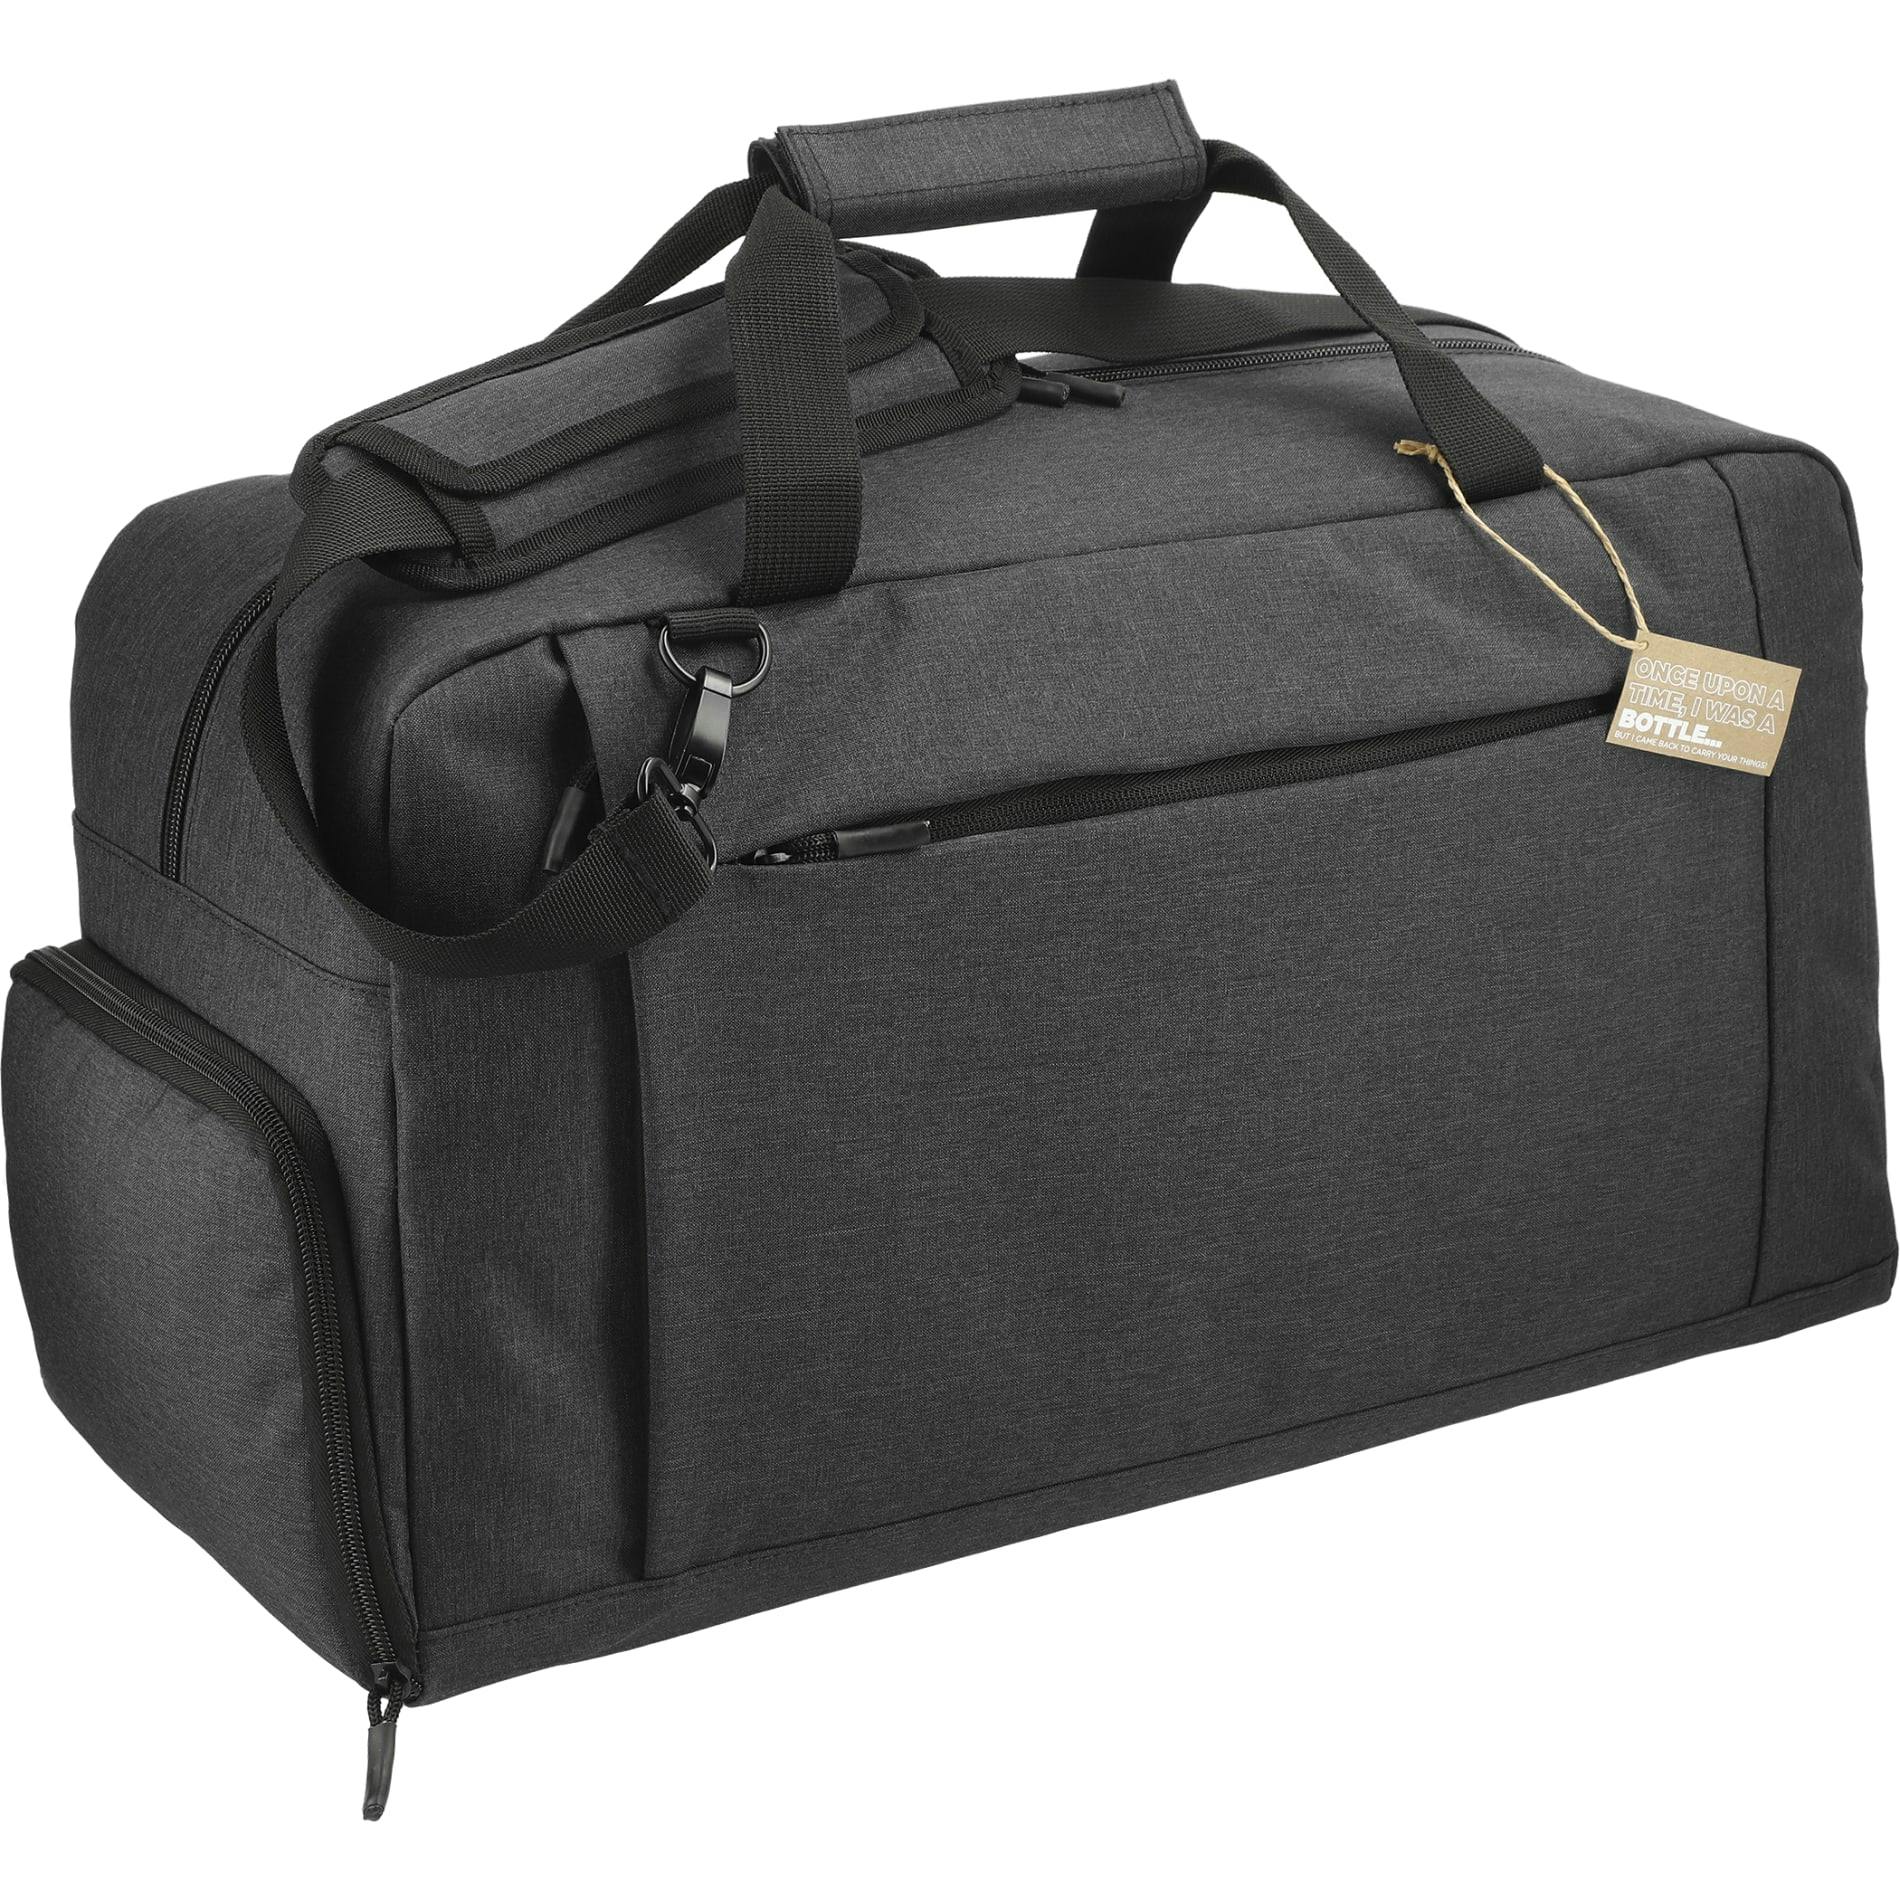 Aft Recycled 21" Duffel - additional Image 1